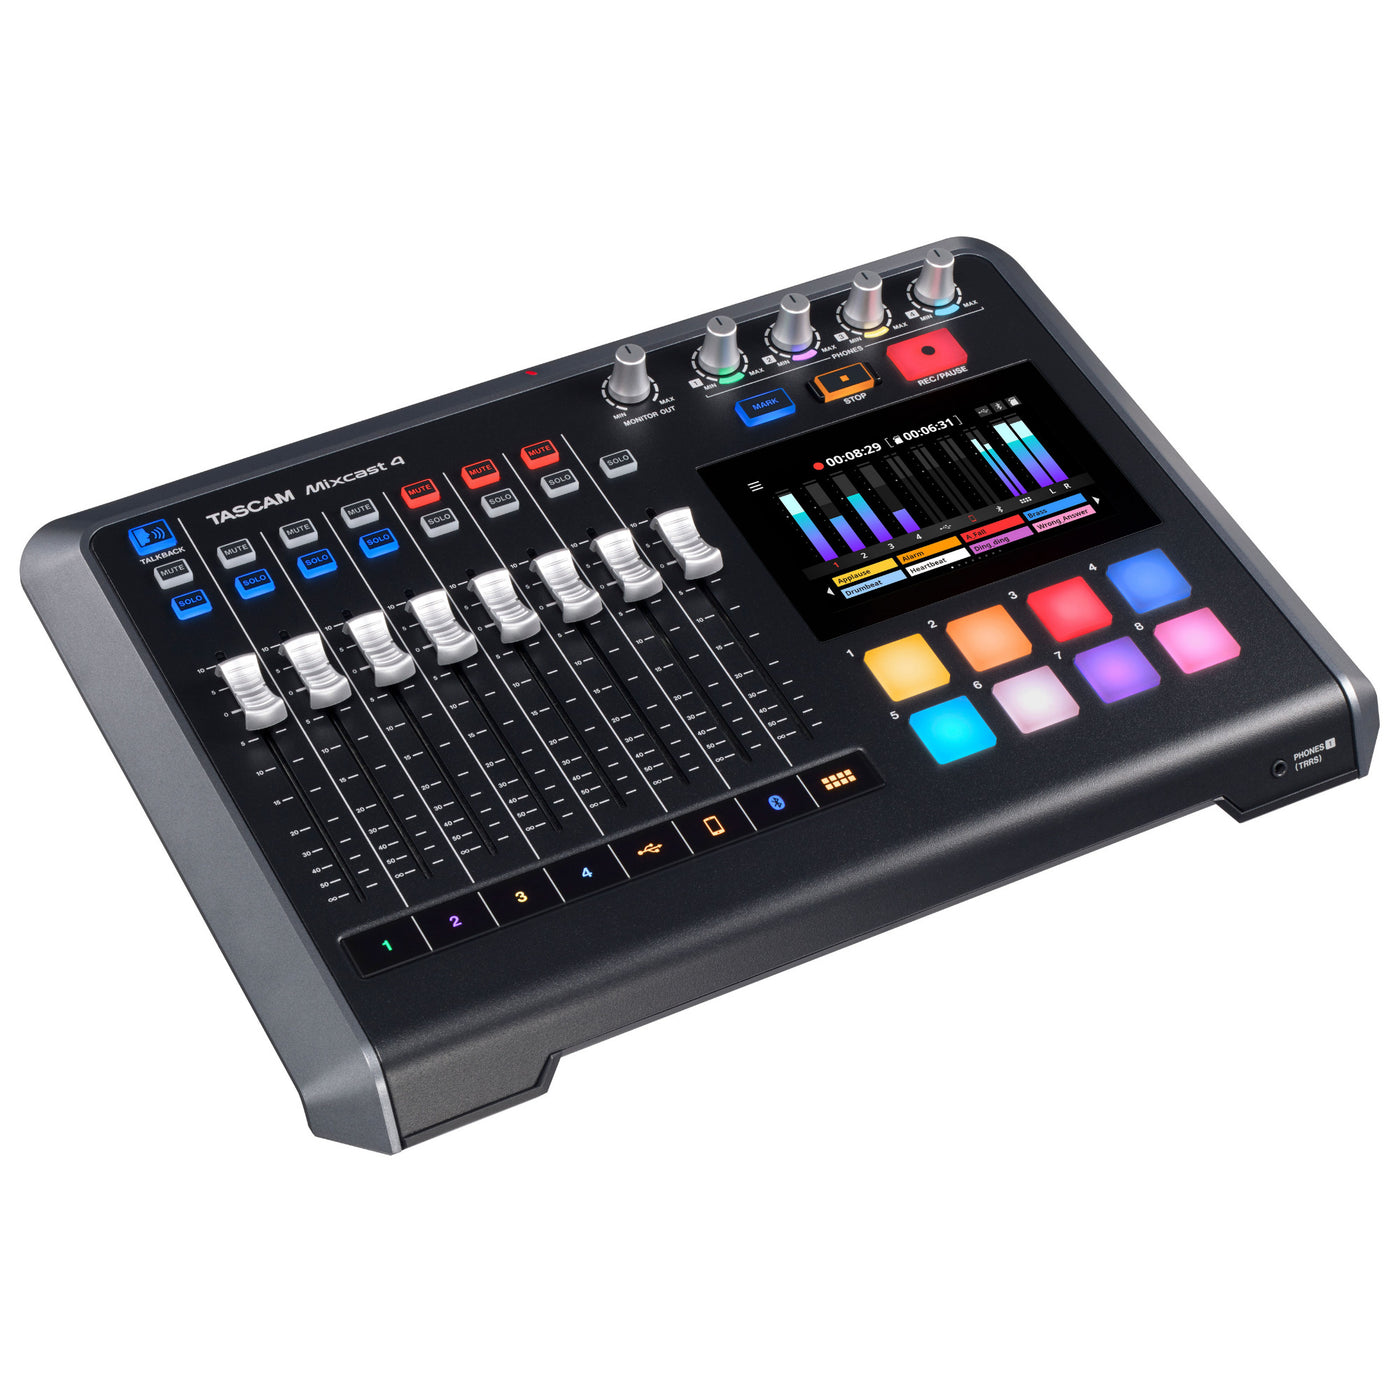 Tascam Mixcast 4 Podcast Station with Built-in Recorder and USB Audio Interface